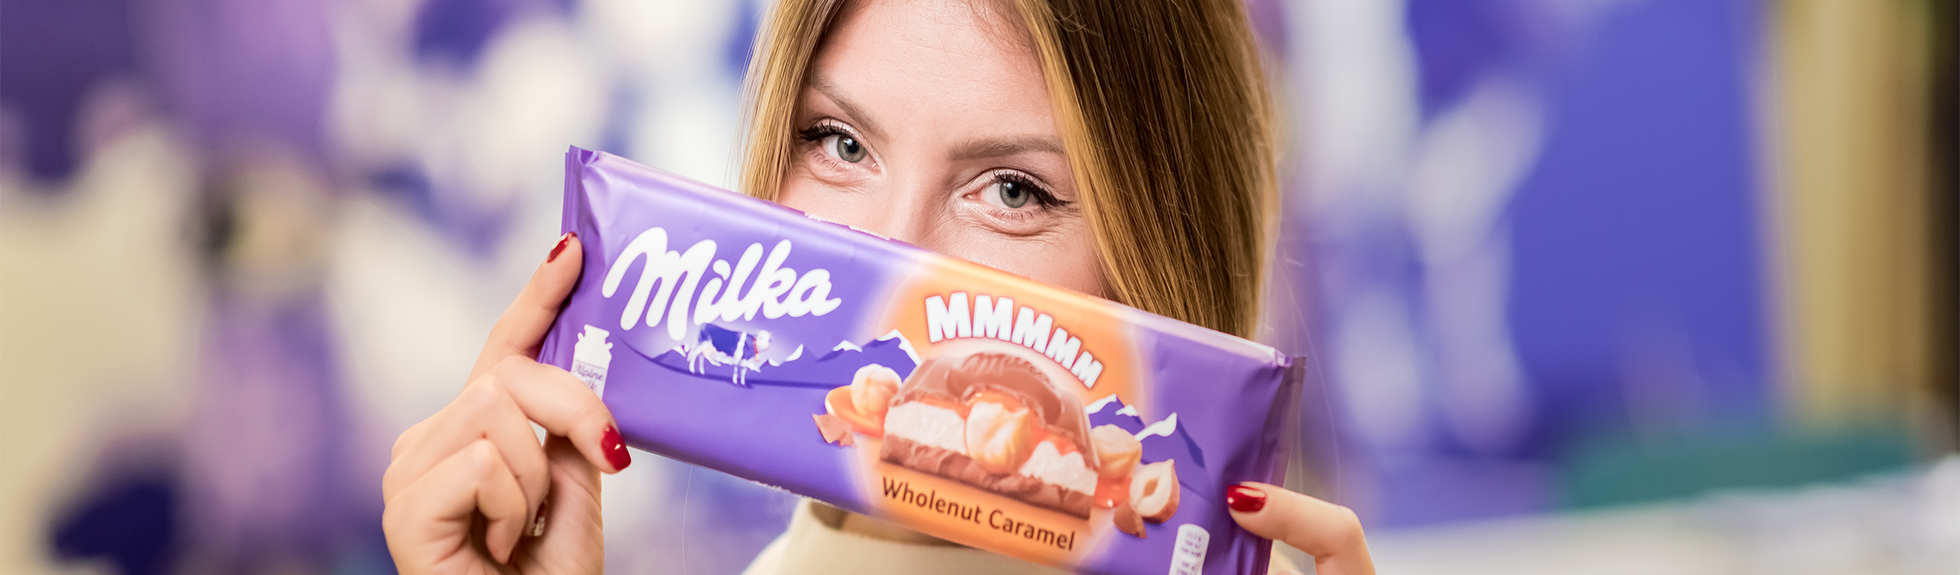 Lady Smiling with Milka